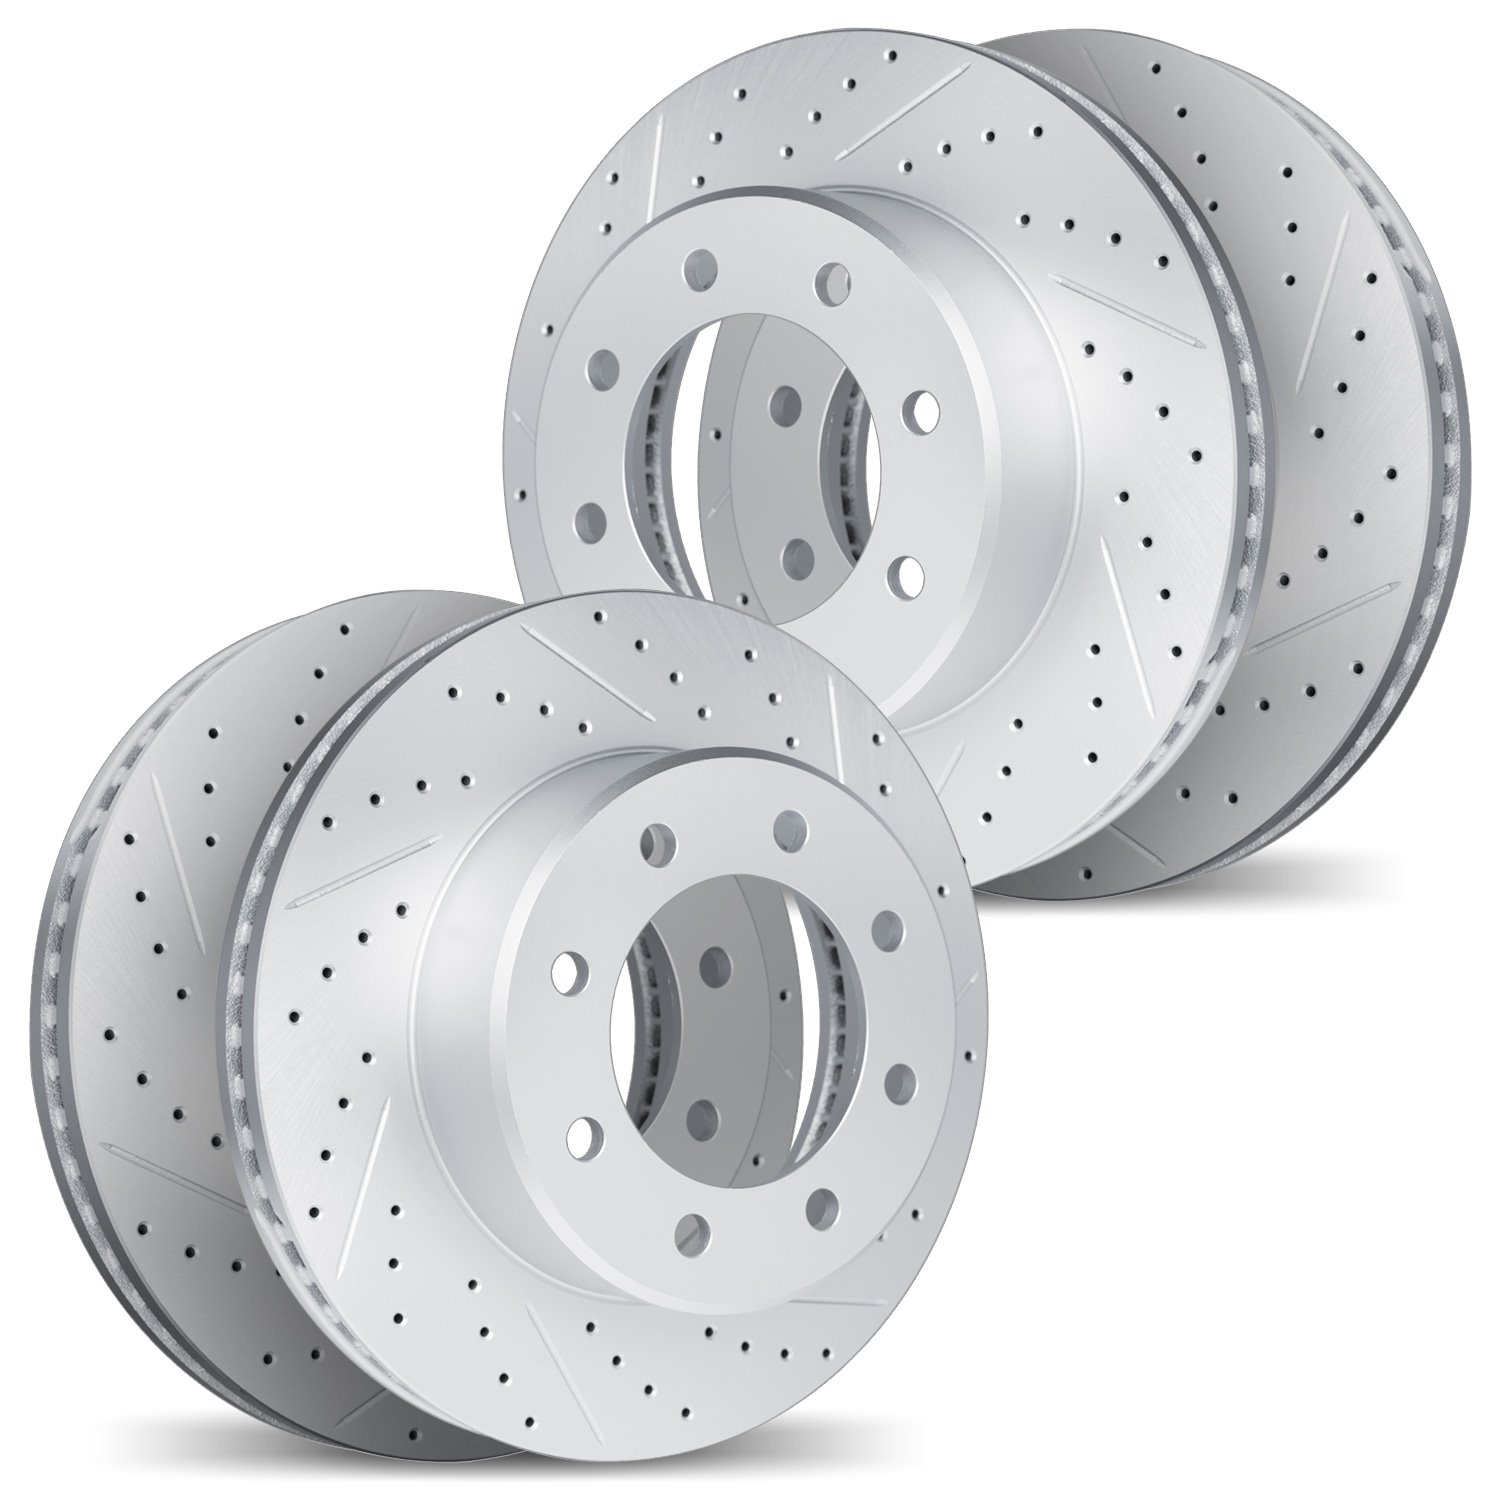 2004-54122 Geoperformance Drilled/Slotted Brake Rotors, 1999-2004 Ford/Lincoln/Mercury/Mazda, Position: Front and Rear